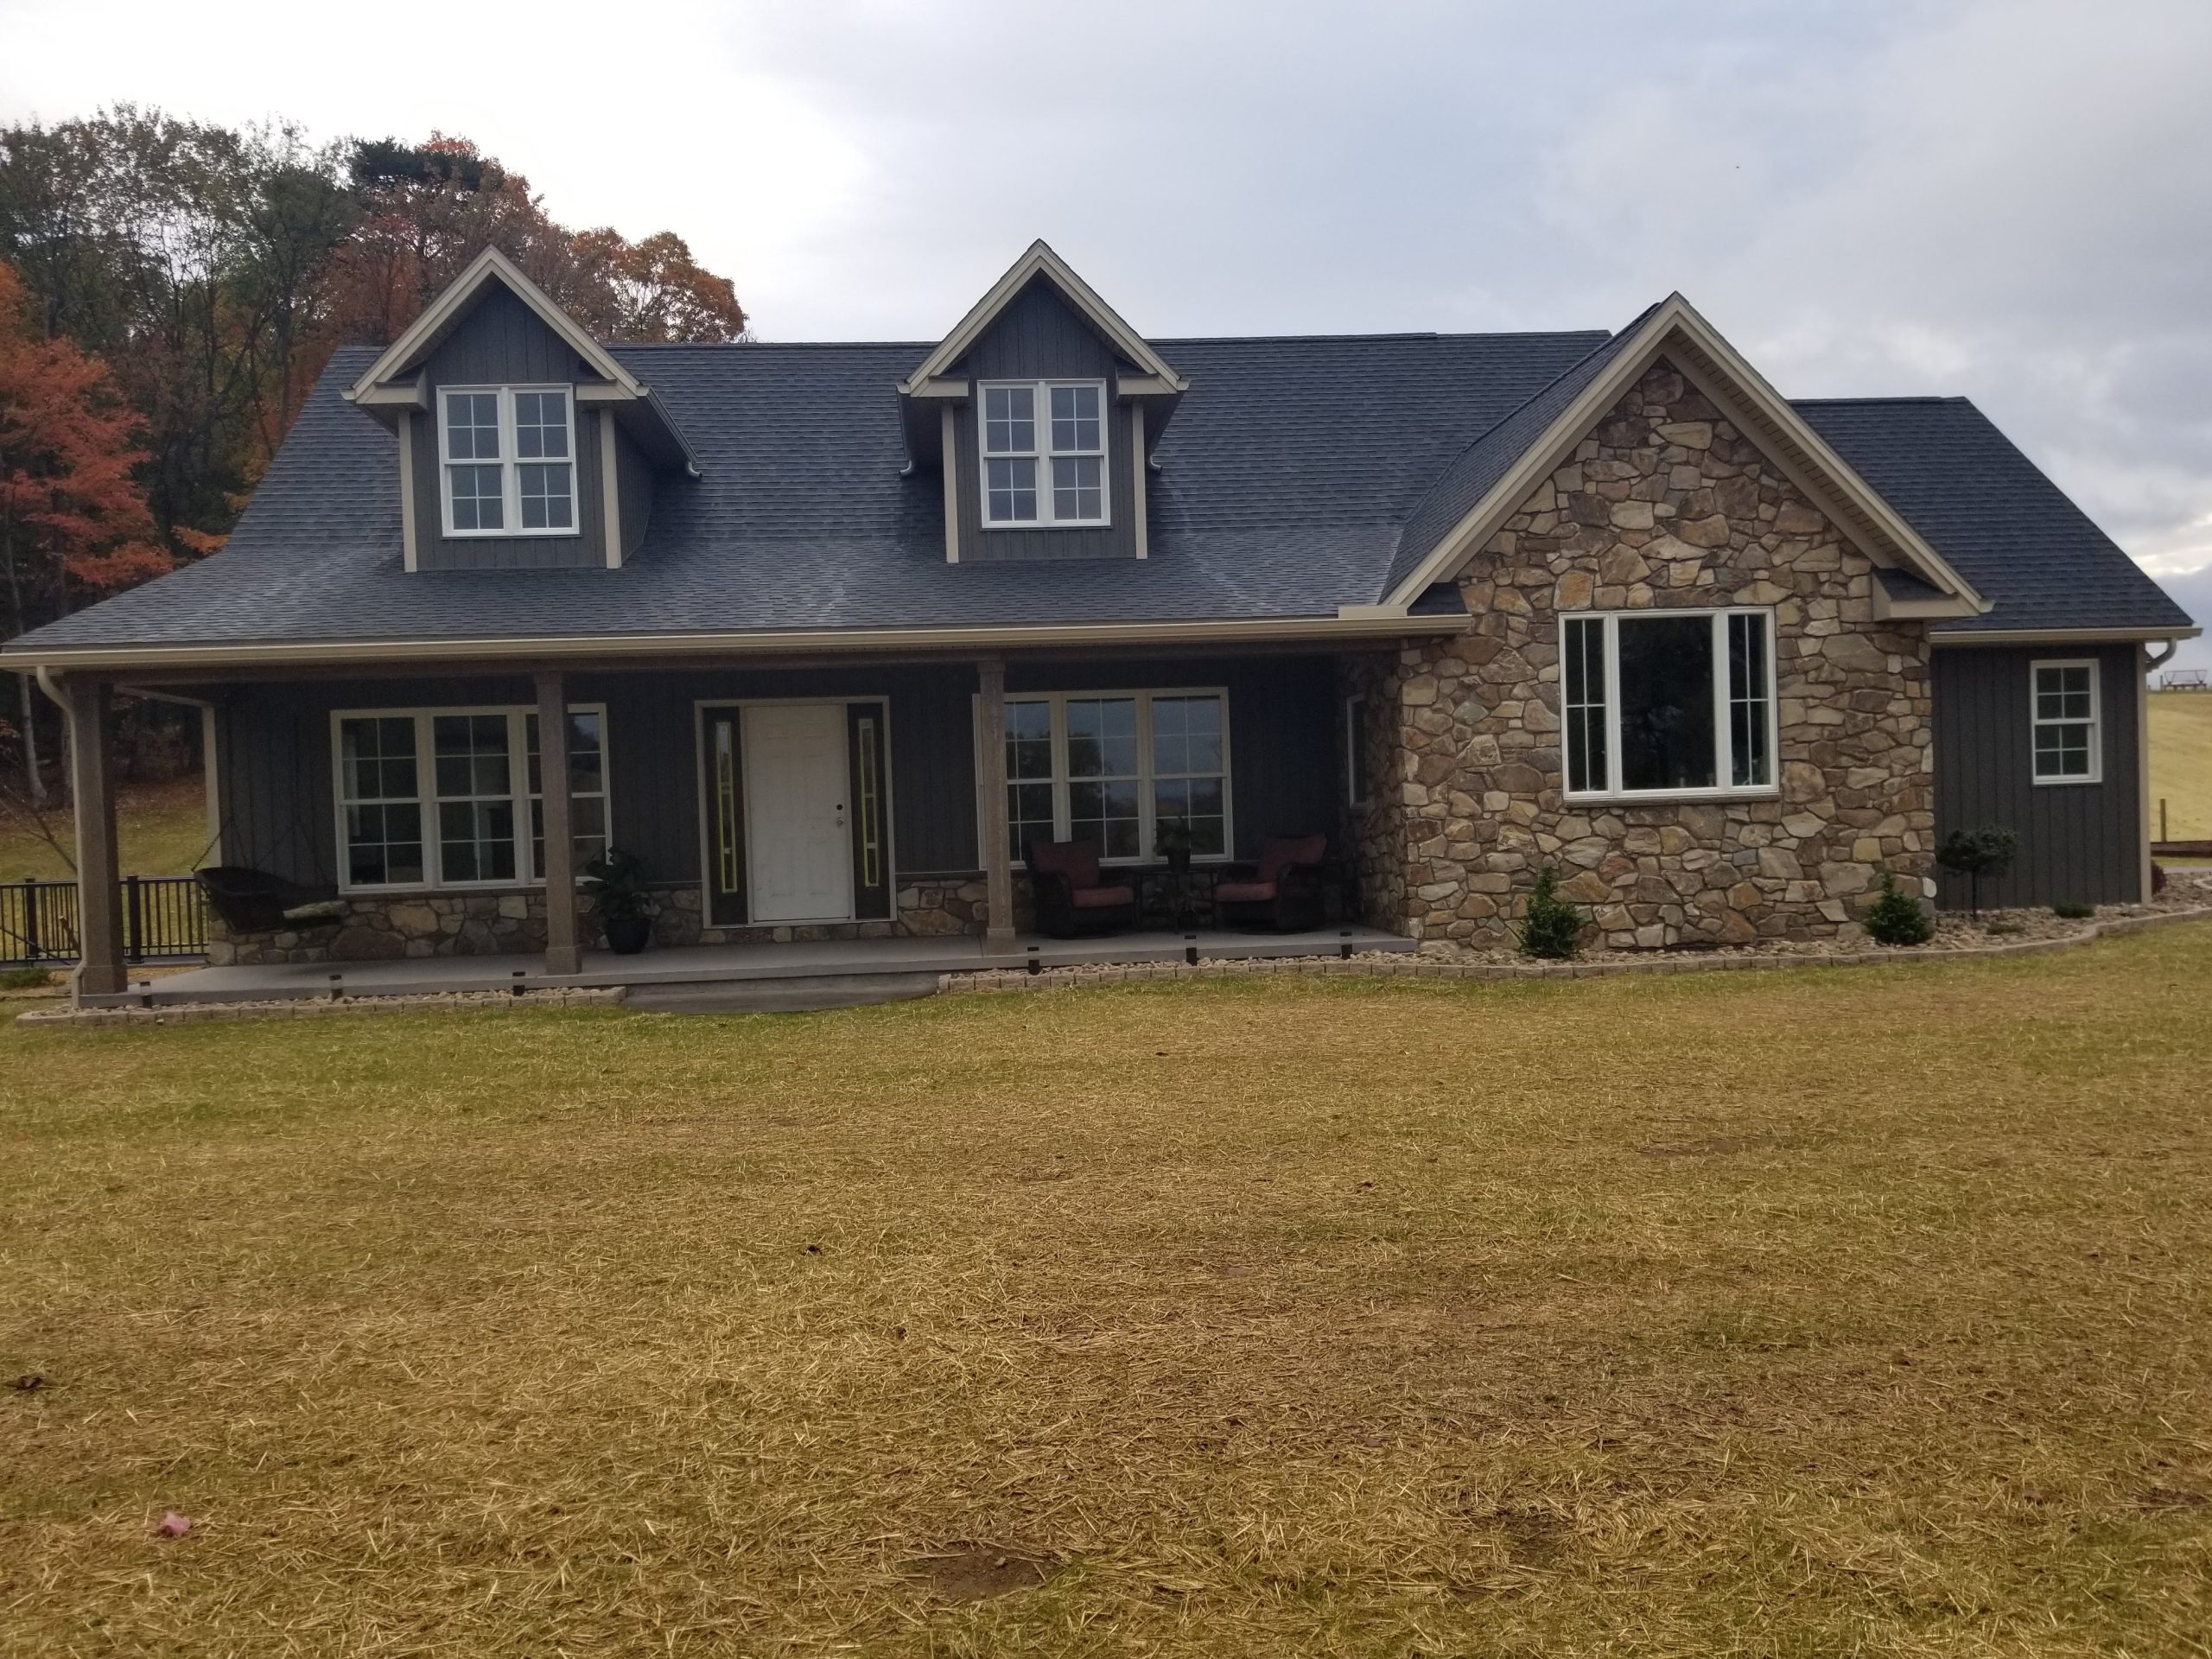 Front exterior view of a new home with dark gray siding, black roofing, stone accents, and a covered front porch.